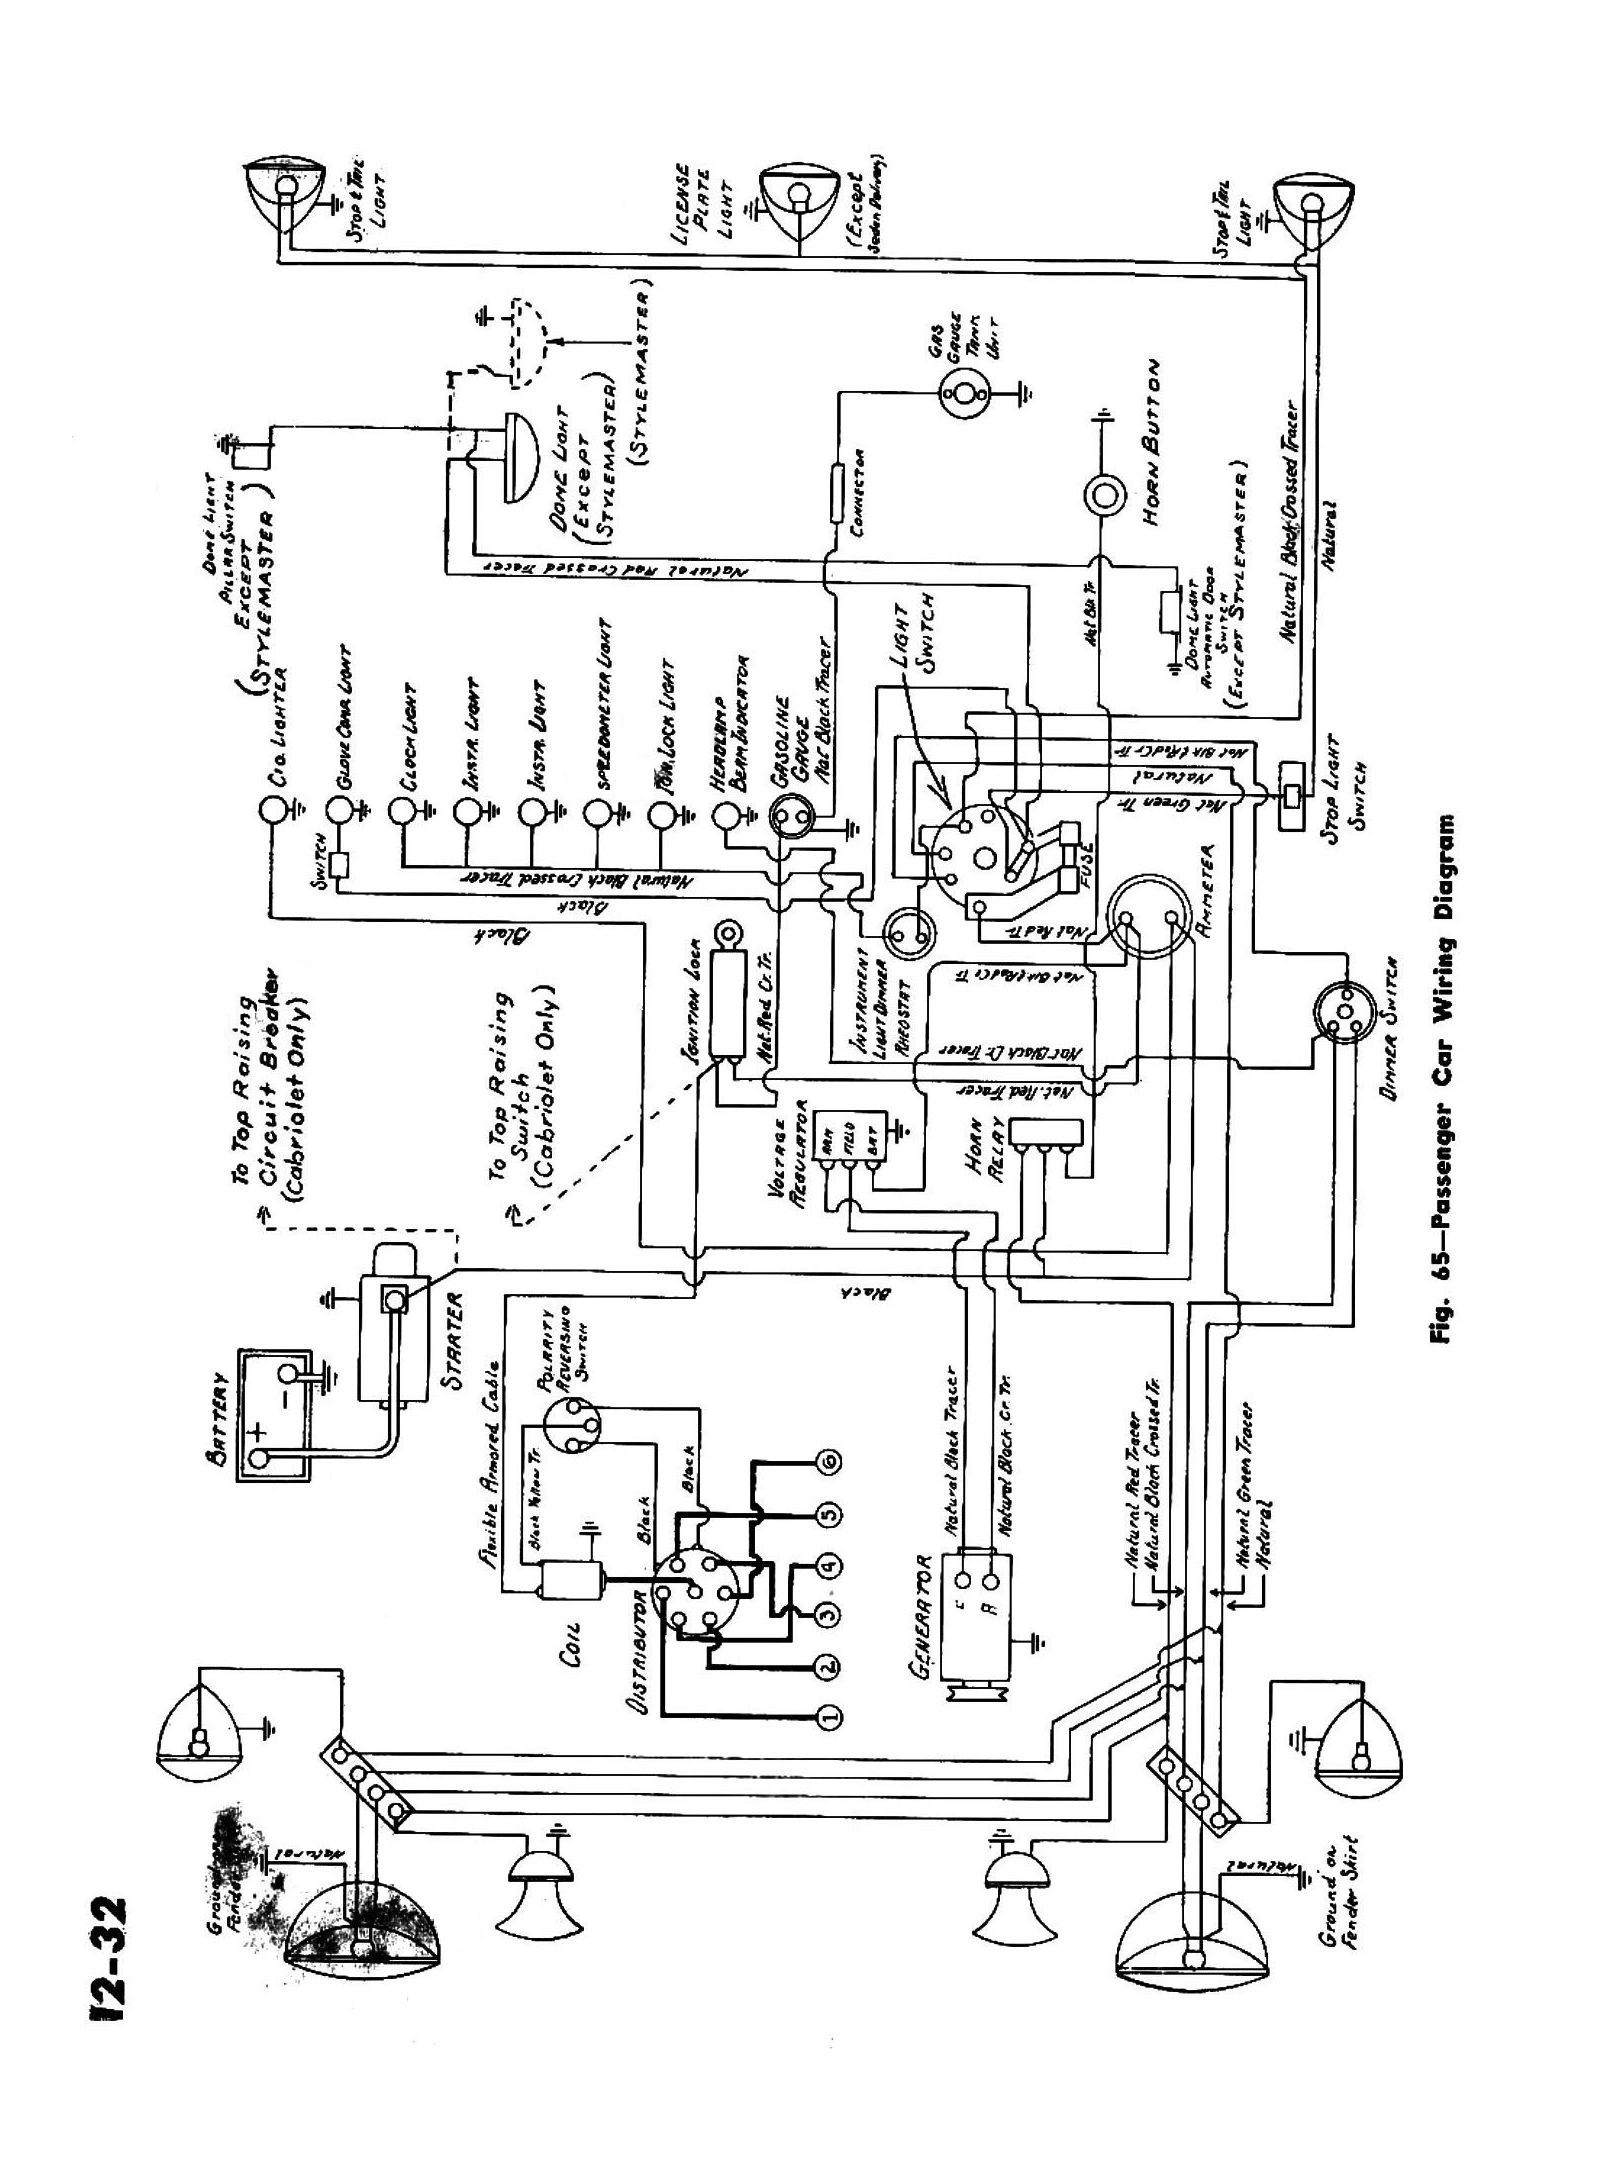 Electrical Diagram House Wiring Pdf Chevy Wiring Diagrams Of Electrical Diagram House Wiring Pdf